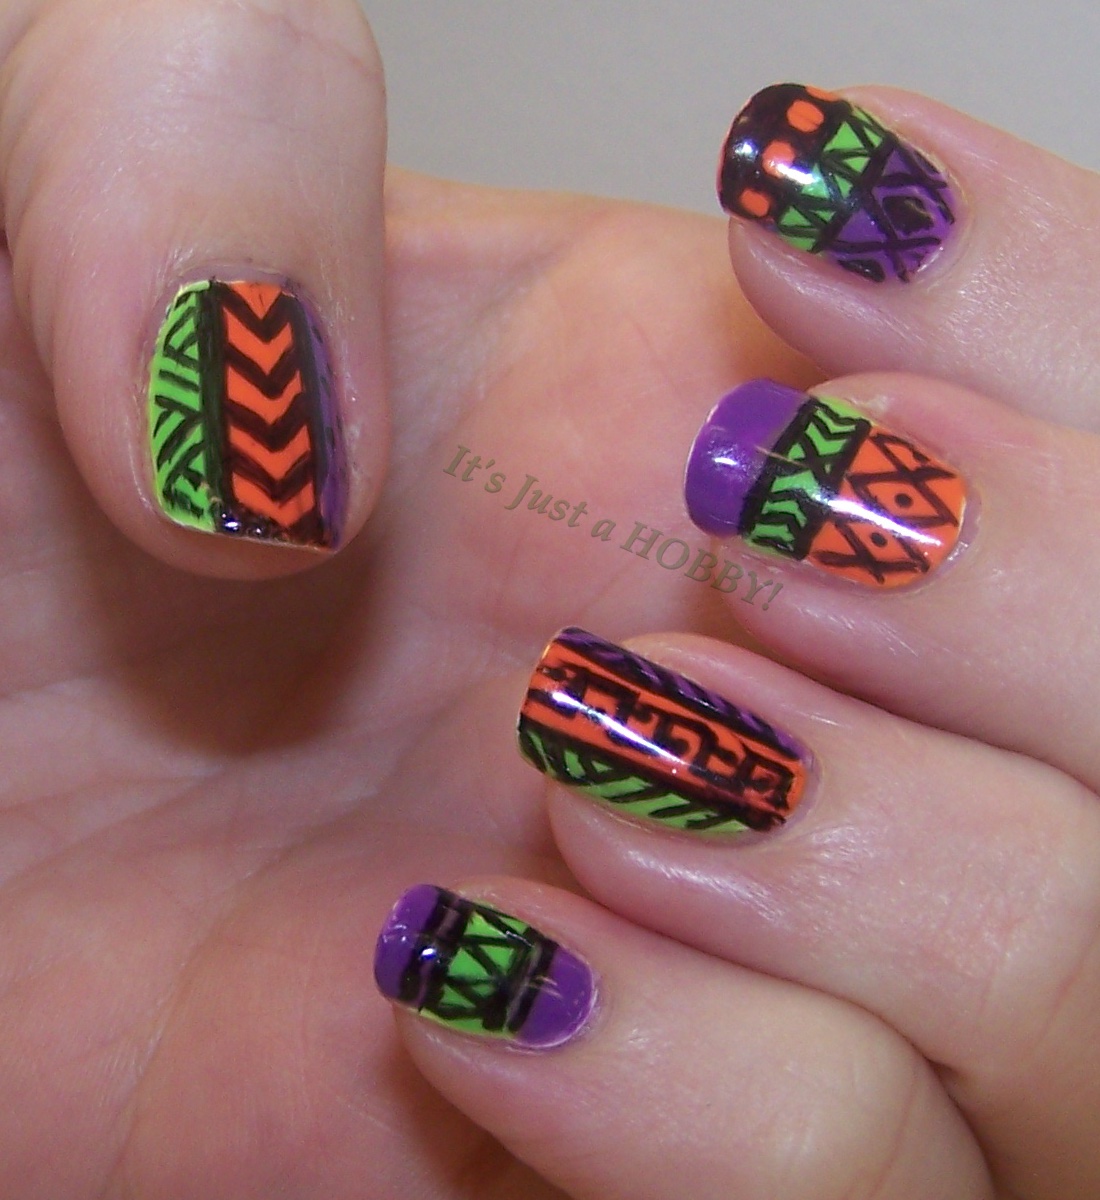 It's Just a HOBBY!: Neon Tribal